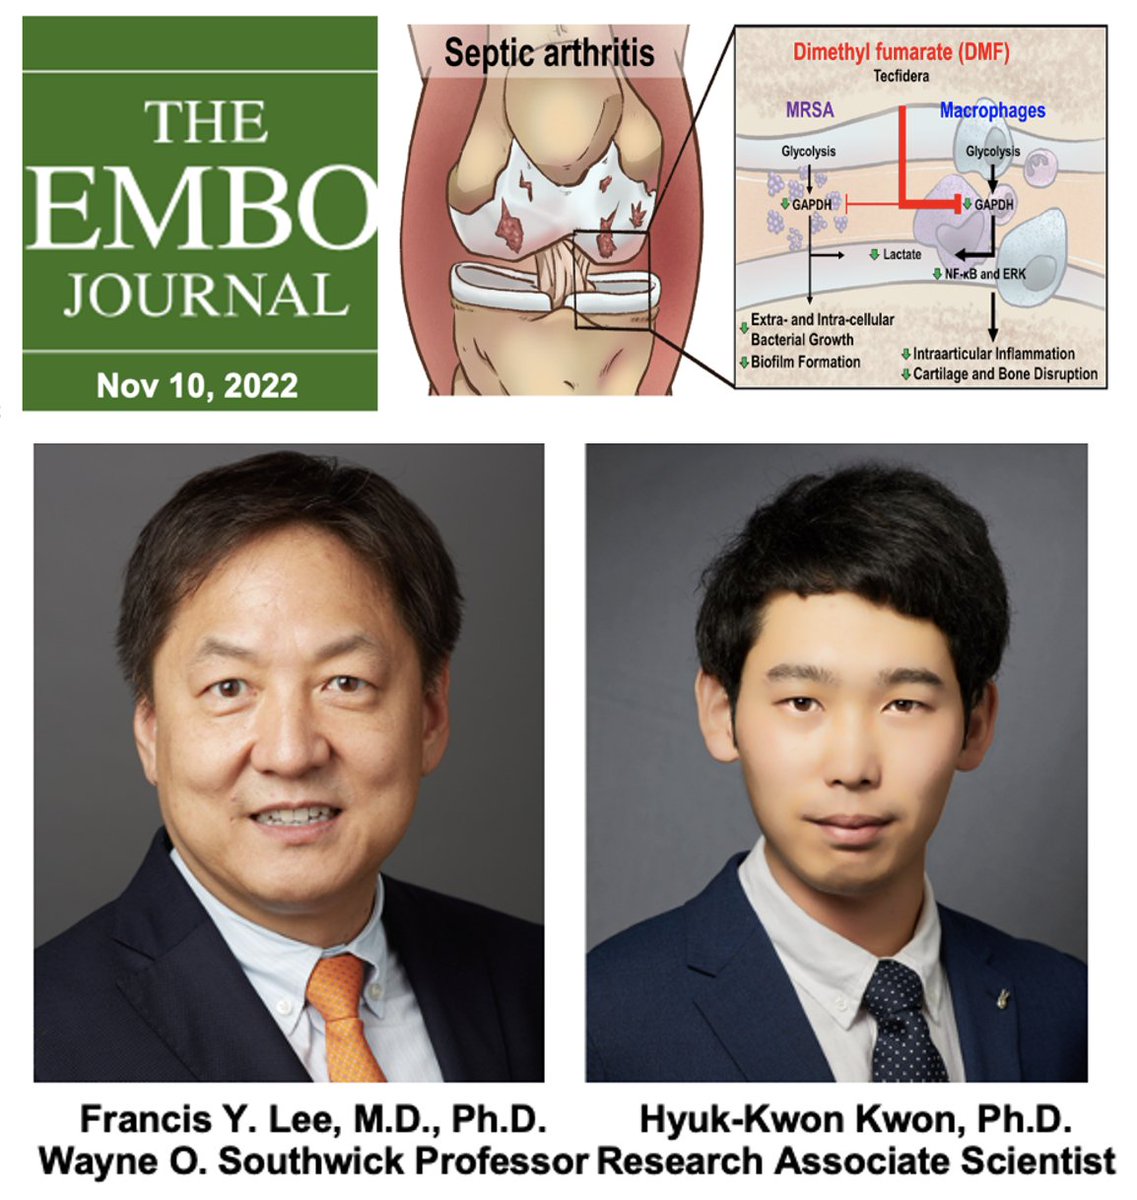 Dr. Francis Lee, NIH-funded Orthopaedic Surgeon Scholar and Musculoskeletal #TumorSurgeon, & Research Associate Dr. Hyuk-Kwon Kwon unraveled immune-metabolic mechanisms of septic arthritis - bit.ly/3WPX6zu. #OrthoTwitter #MusculoskeletalOncology #OrthoOncology #OrthoOnc